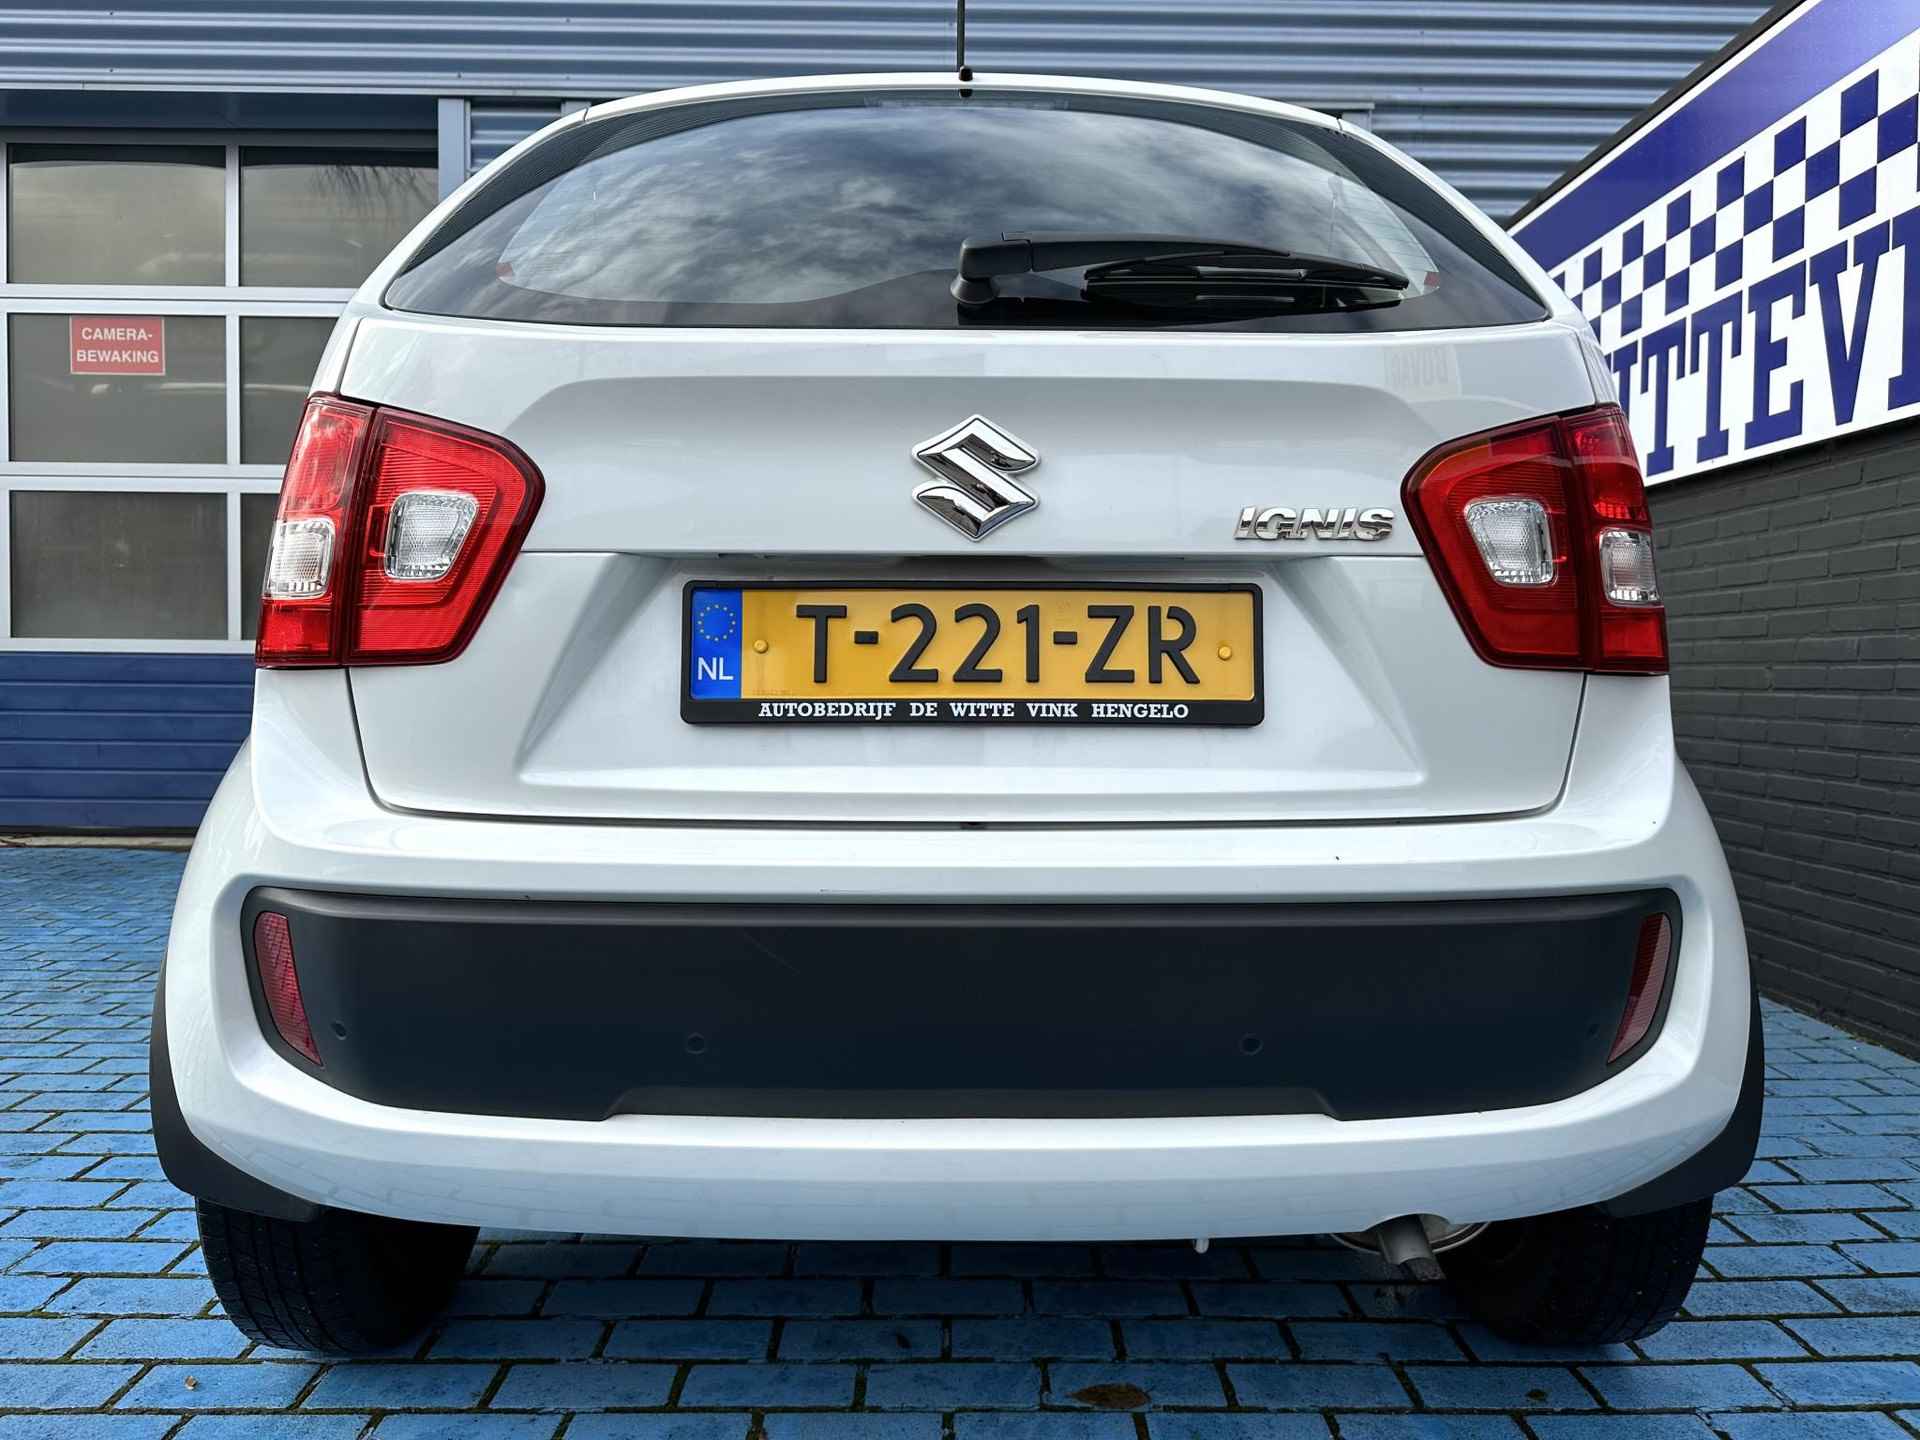 Suzuki Ignis 1.2 Comfort PDC V+A HOGE INSTAP AIRCO PDC BOVAG - 10/30